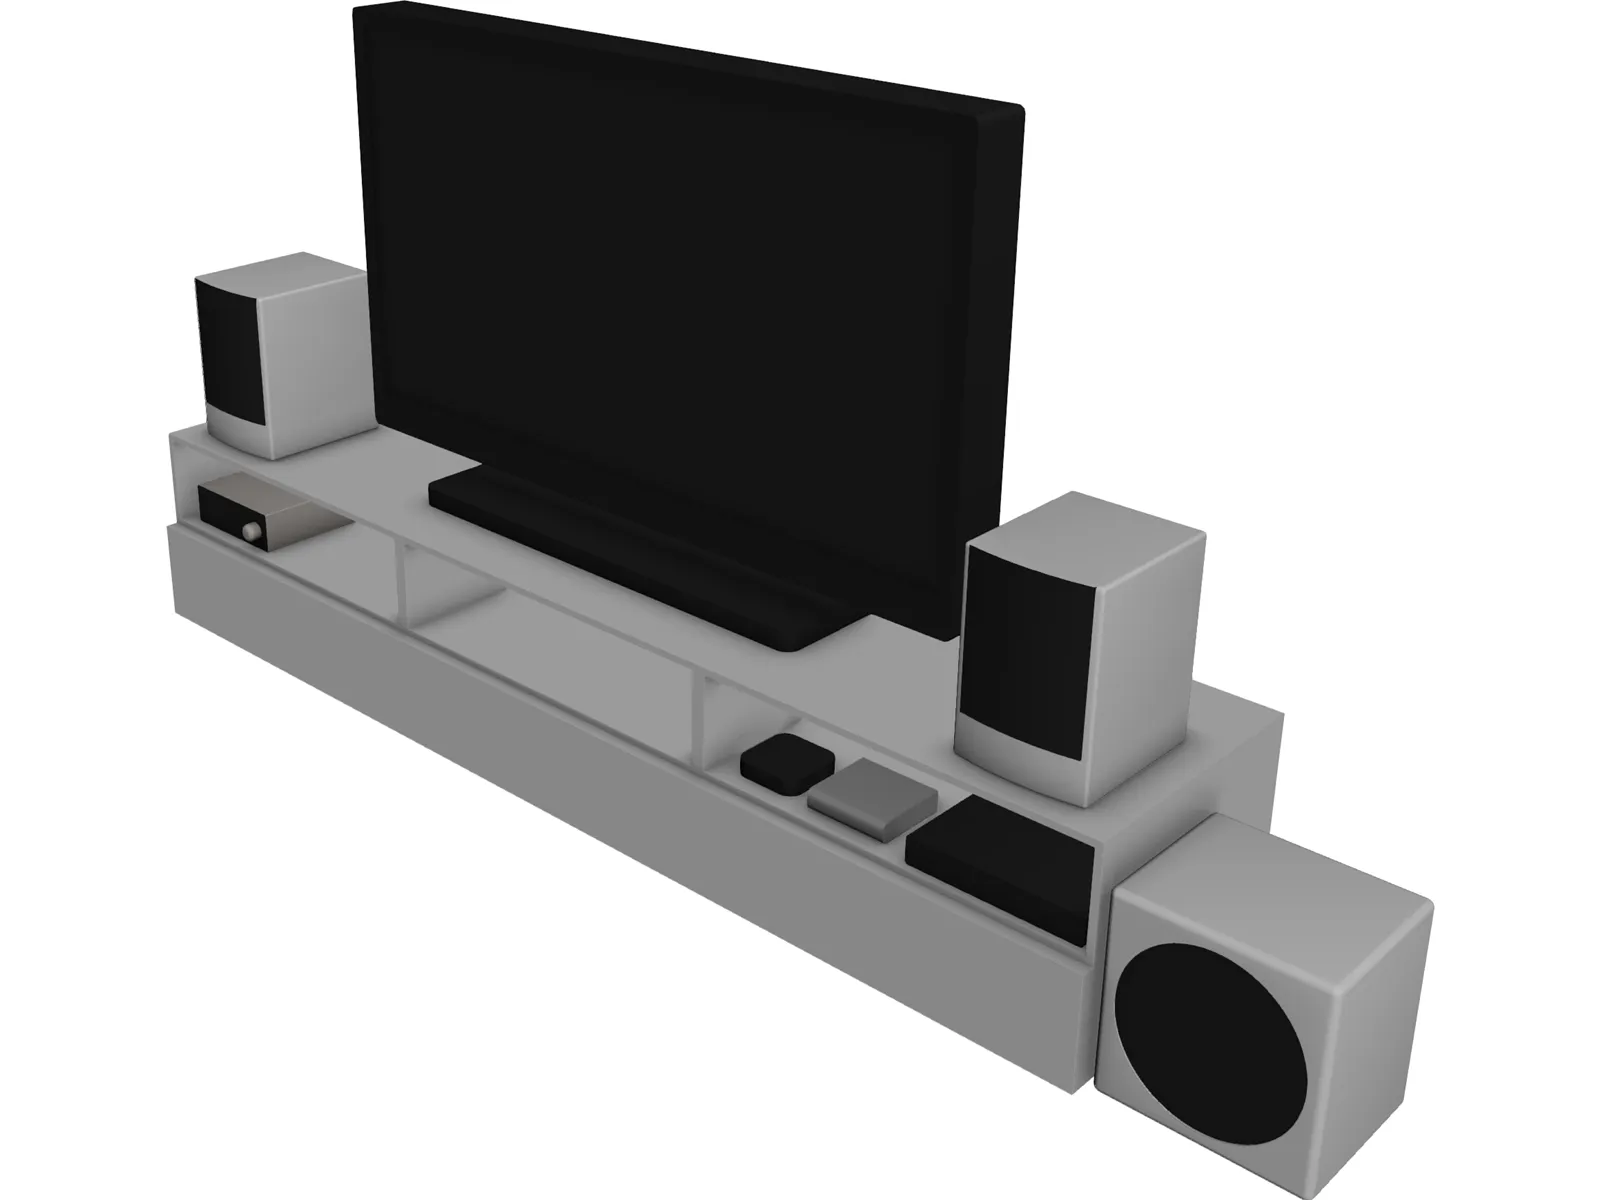 TV Rack with TV and Stereo 3D Model